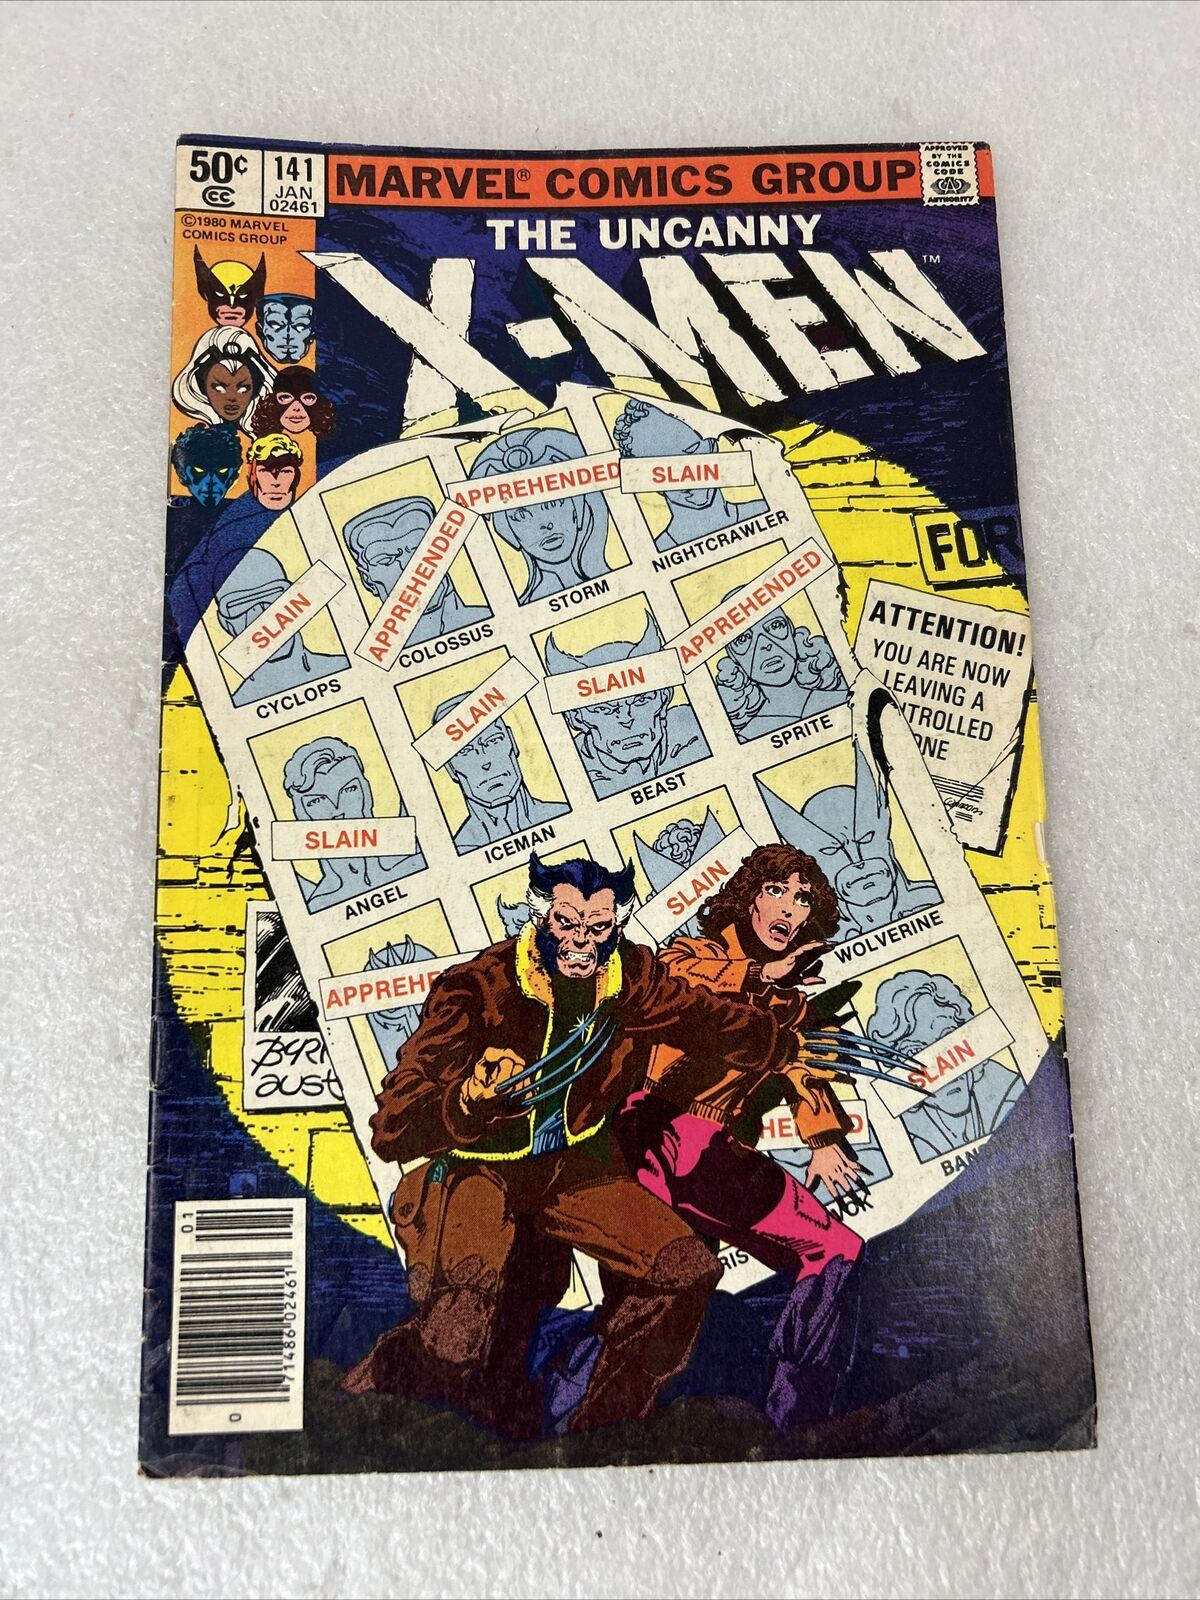 The Uncanny X-Men #141 Marvel First appearance of Rachel Newsstand Edition